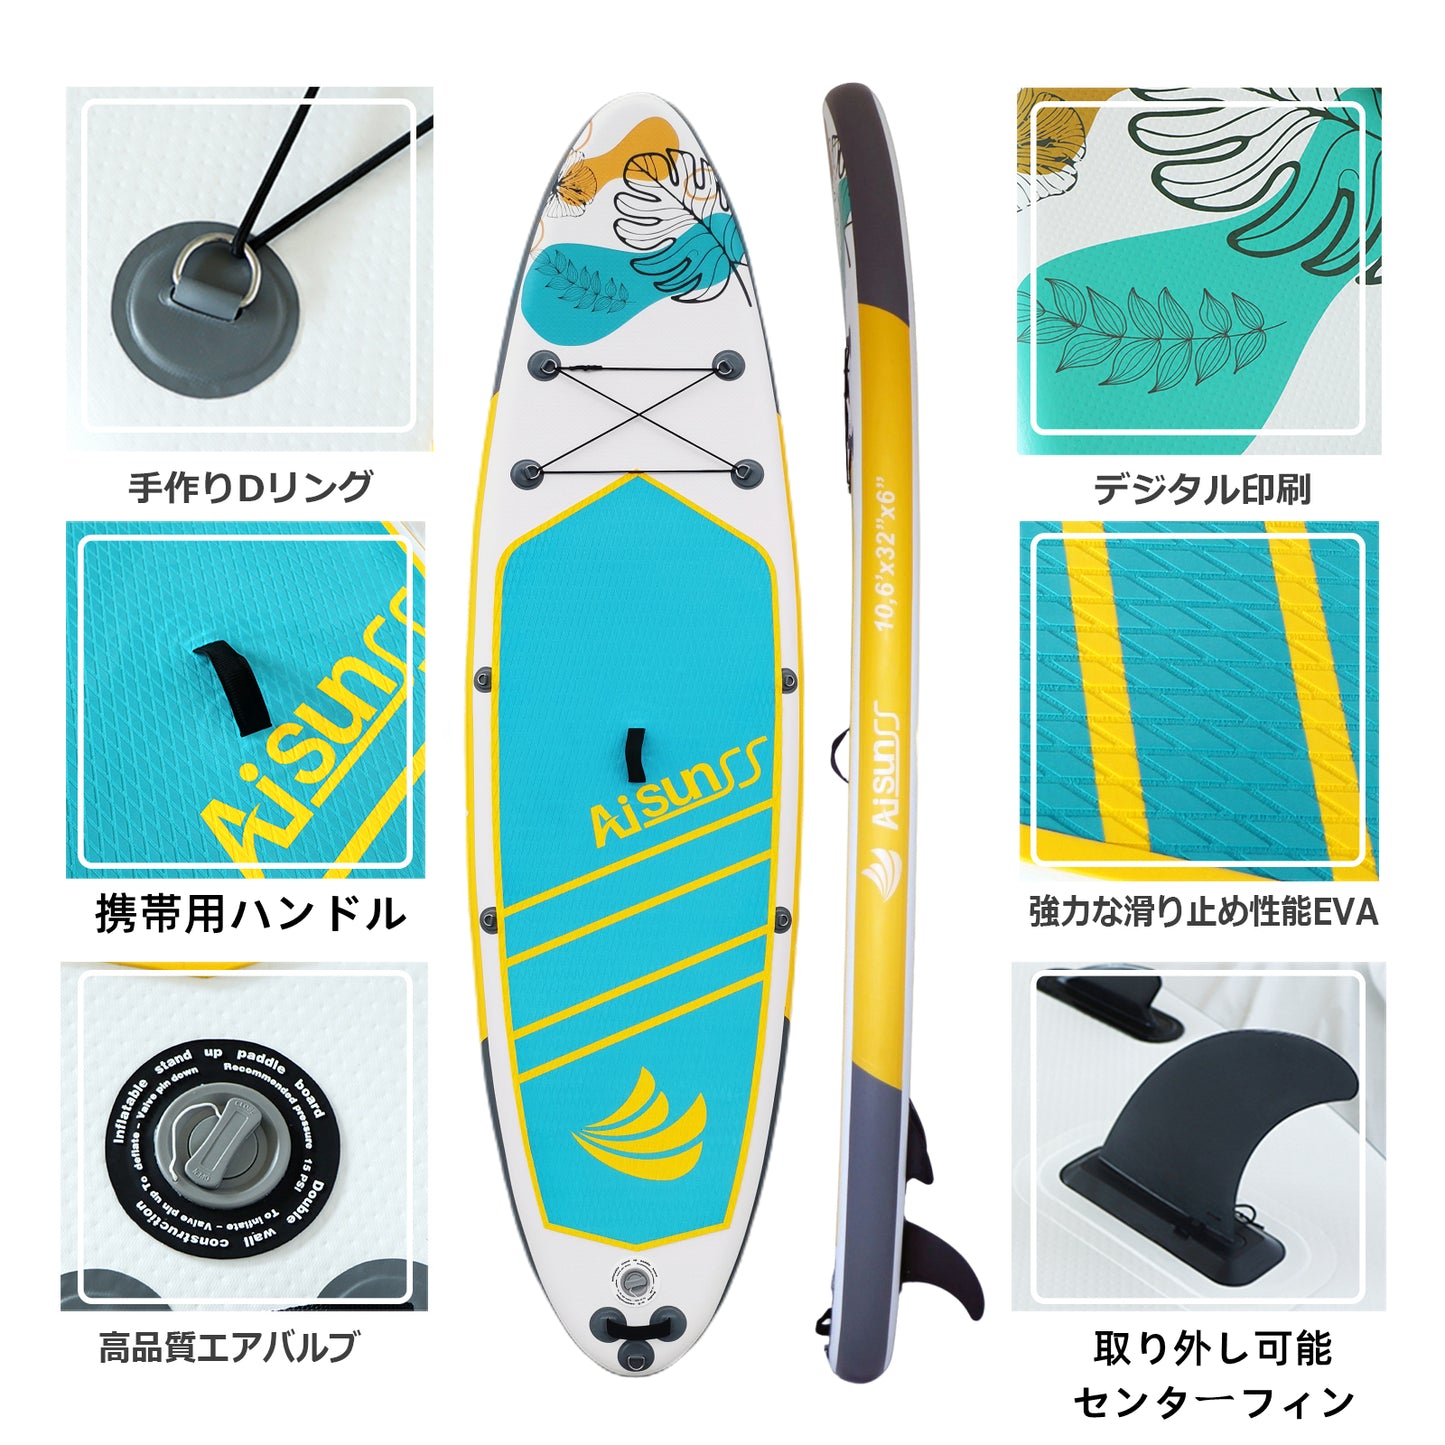 AISUNSS Inflatable Paddle Board 10.6Ft